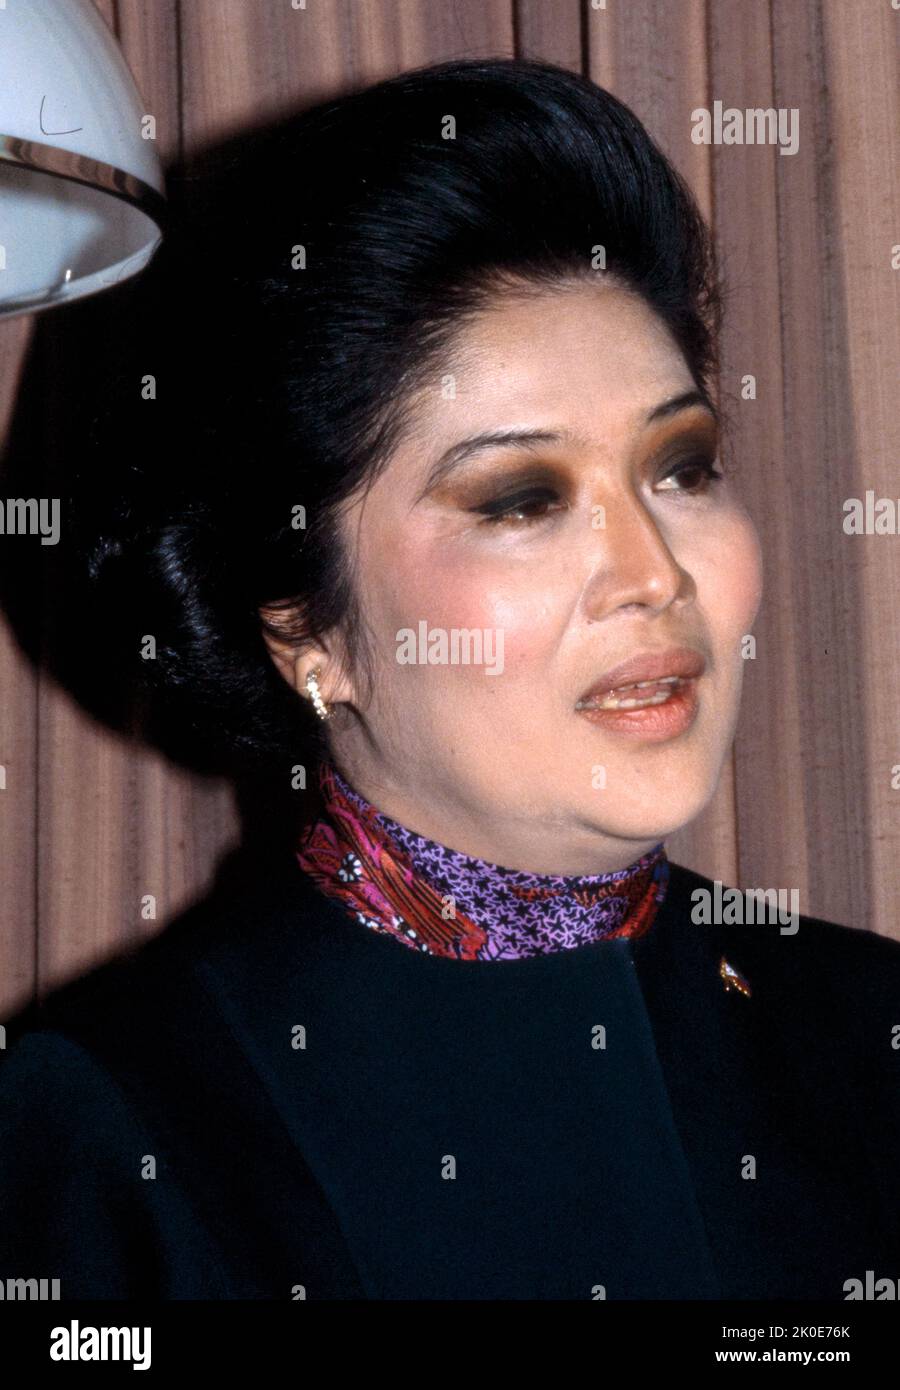 Imelda Marcos (born 1929) Filipina politician and convicted criminal who was First Lady of the Philippines for 21 years, during which she and her husband Ferdinand Marcos stole billions from the Filipino people. Stock Photo